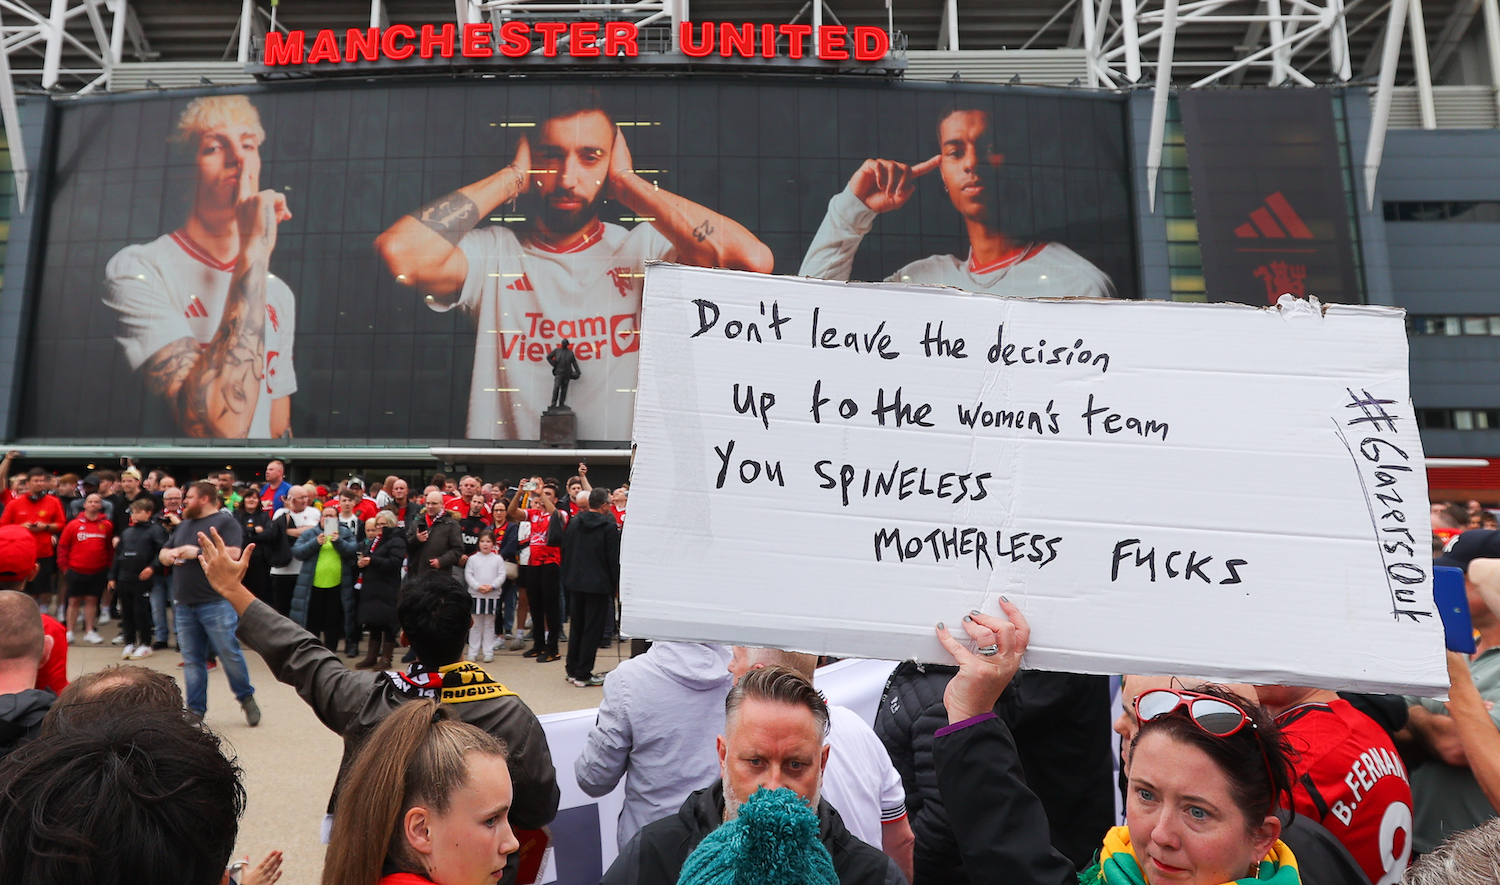 MANCHESTER, ENGLAND - AUGUST 14: Manchester United supporters protest against Mason Greenwood of Manchester United and the Glazers, owners of Manchester United, outside the stadium prior to the Premier League match between Manchester United and Wolverhampton Wanderers at Old Trafford on August 14, 2023 in Manchester, England. (Photo by James Gill - Danehouse/Getty Images)